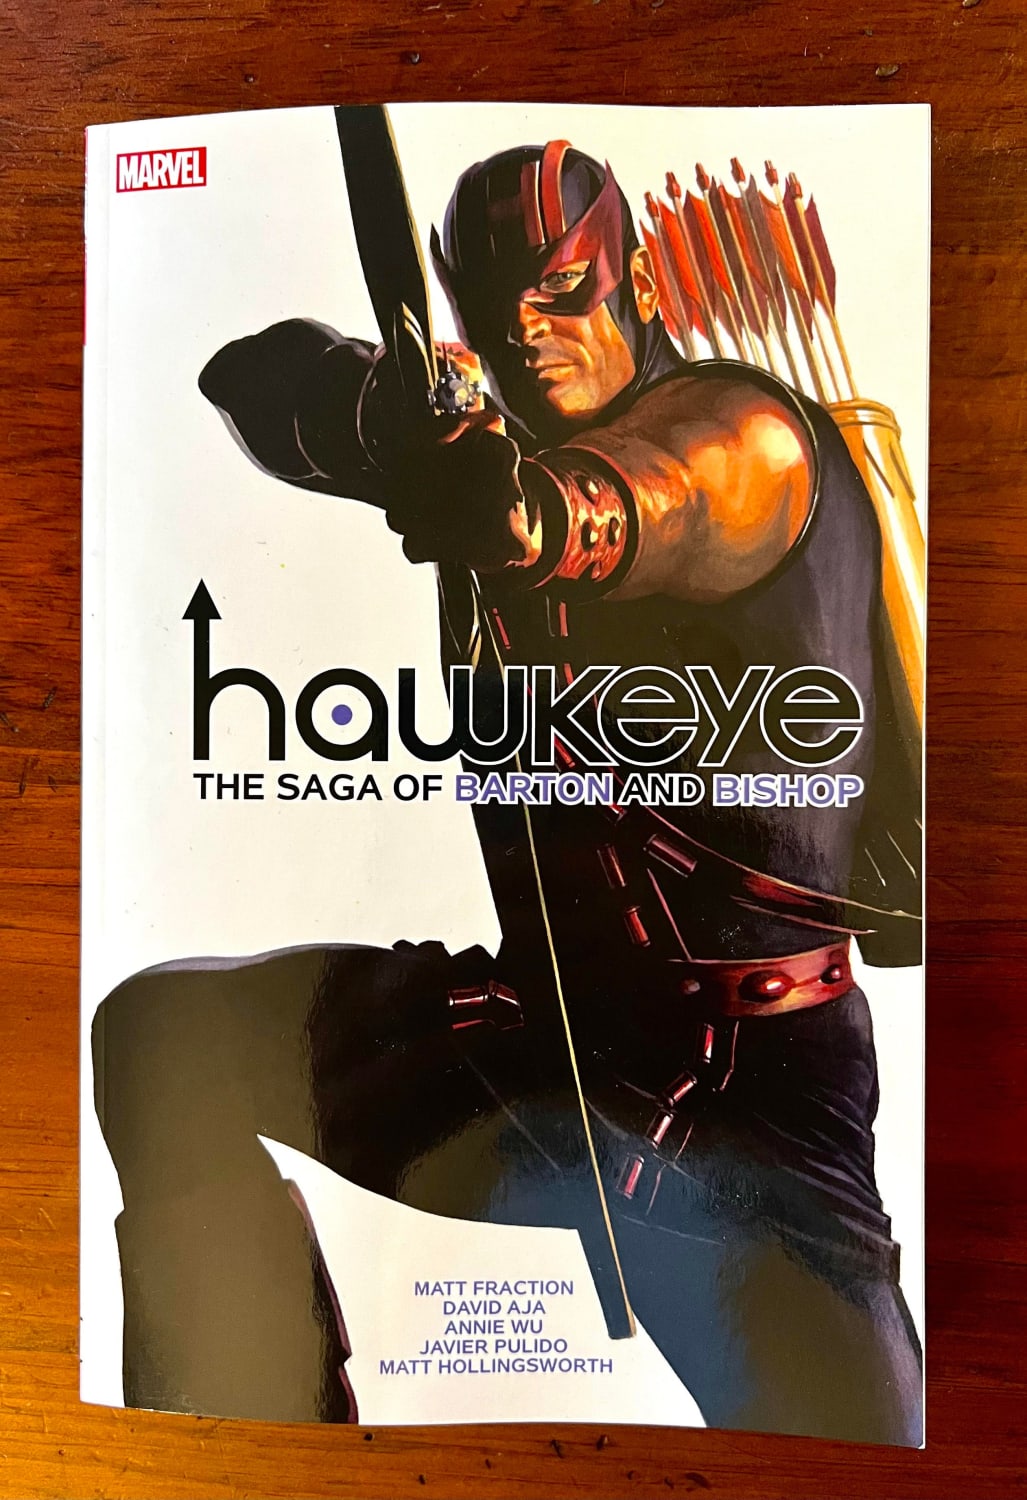 Matt Fraction’s Ultimate Run Releases Today! So much better than another trailer for Hawkeye!